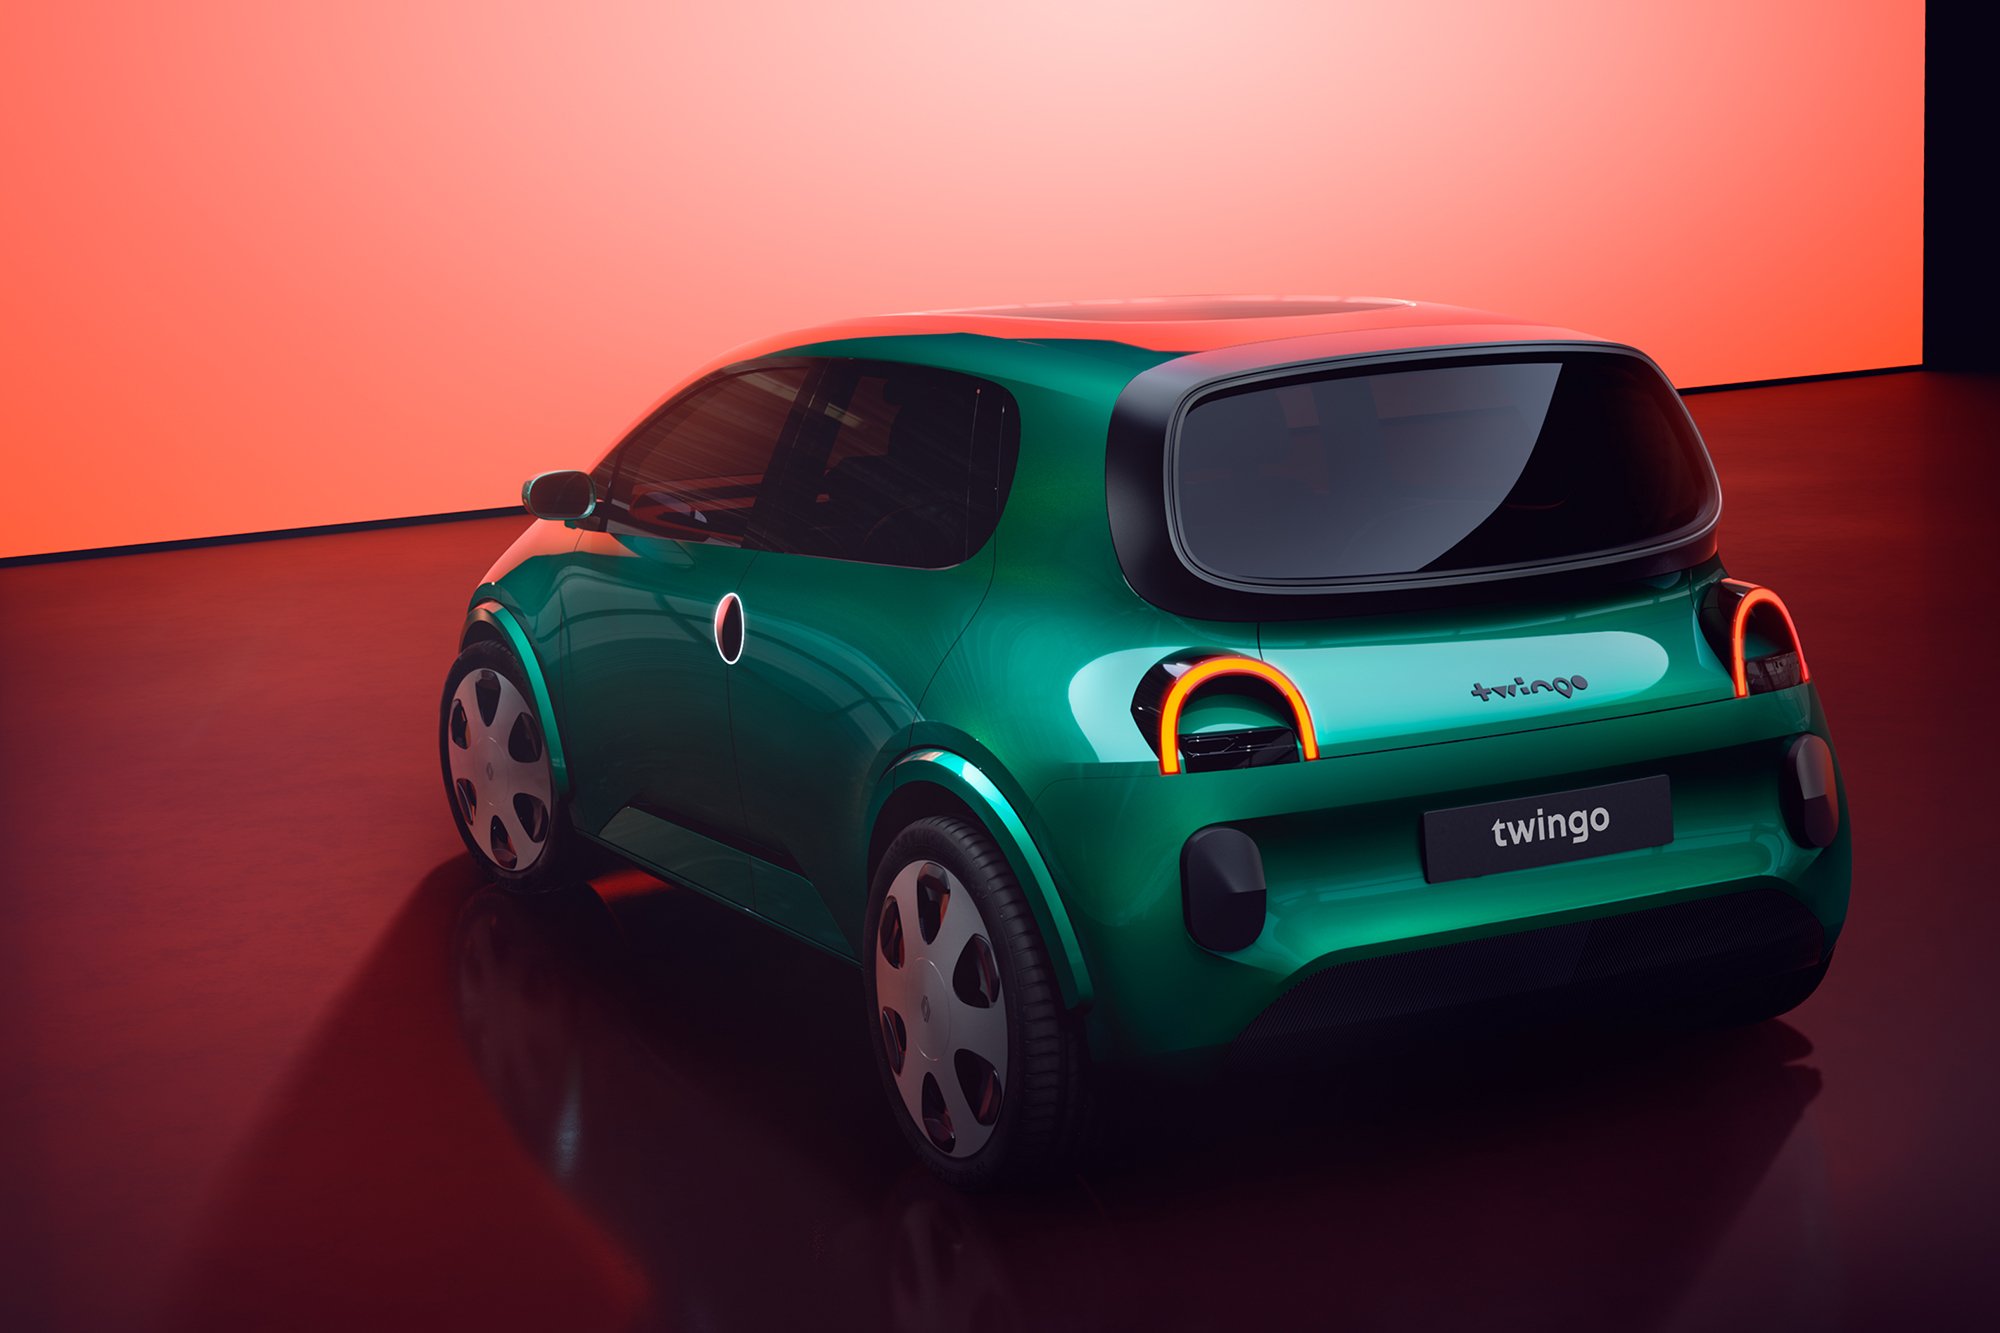 The exterior design of the Renault Legend – a comeback of the Twingo as an electric car